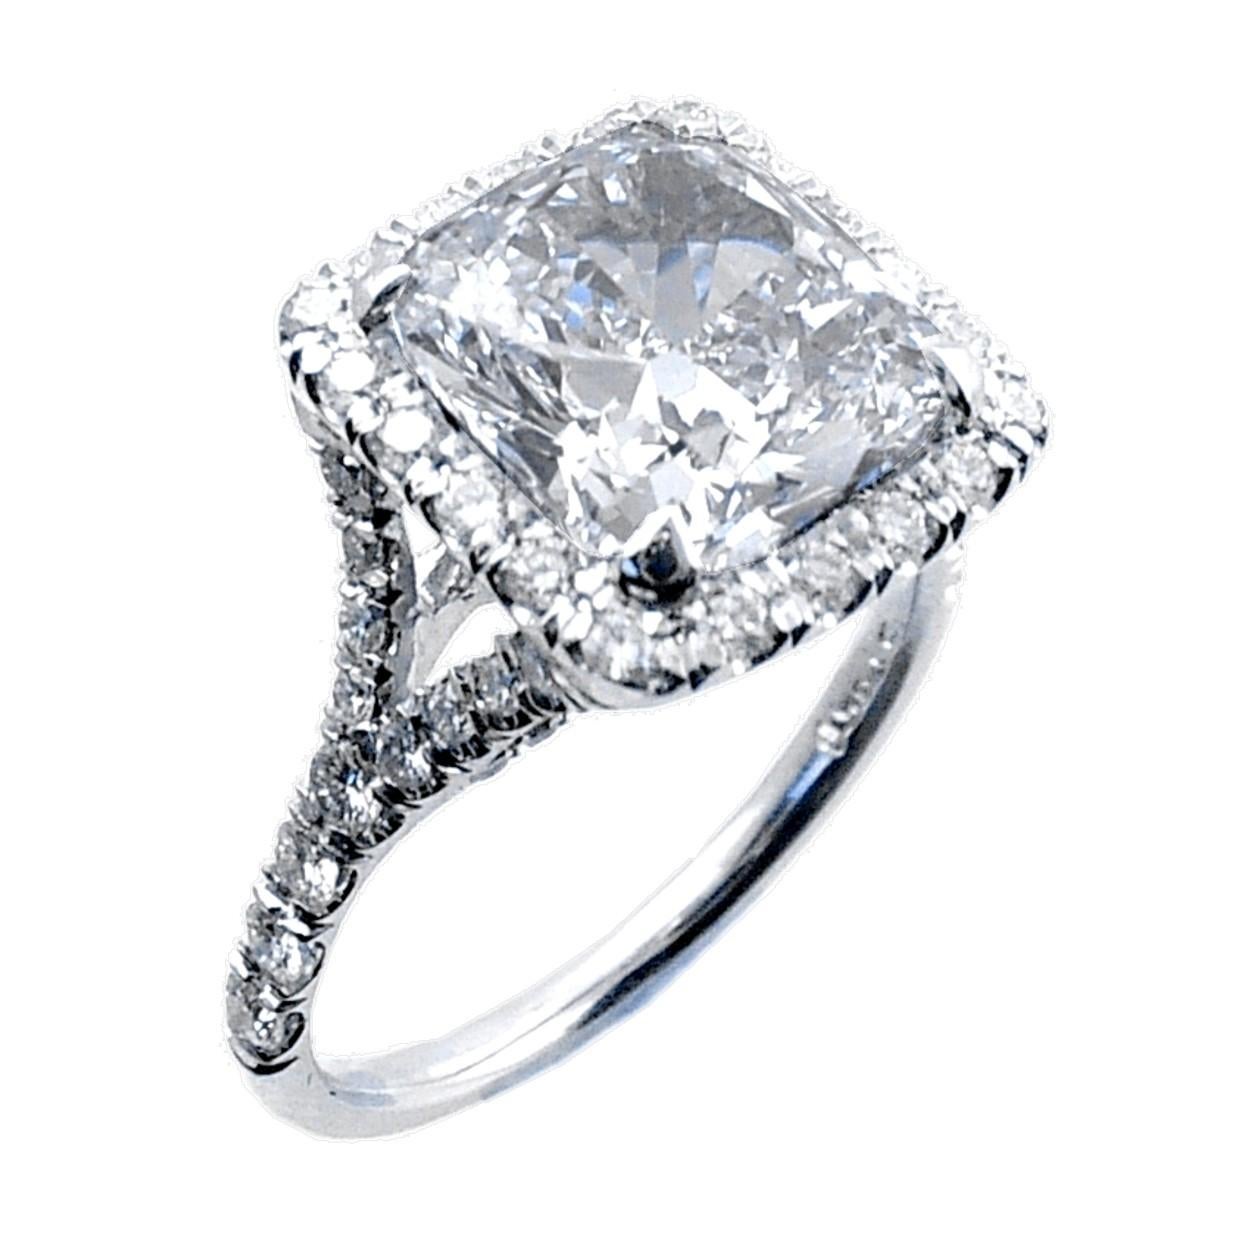 A very shiny 4.06 Ct Square Cushion K/SI1 EGL US certified center Diamond set in a fine Split Shank Platinum Pave set Engagement Ring with a halo. Total diamond weight of 0.59 Ct. on the side. 

Diamond specs:
Center stone: 4.06 Ct EGL US Certified